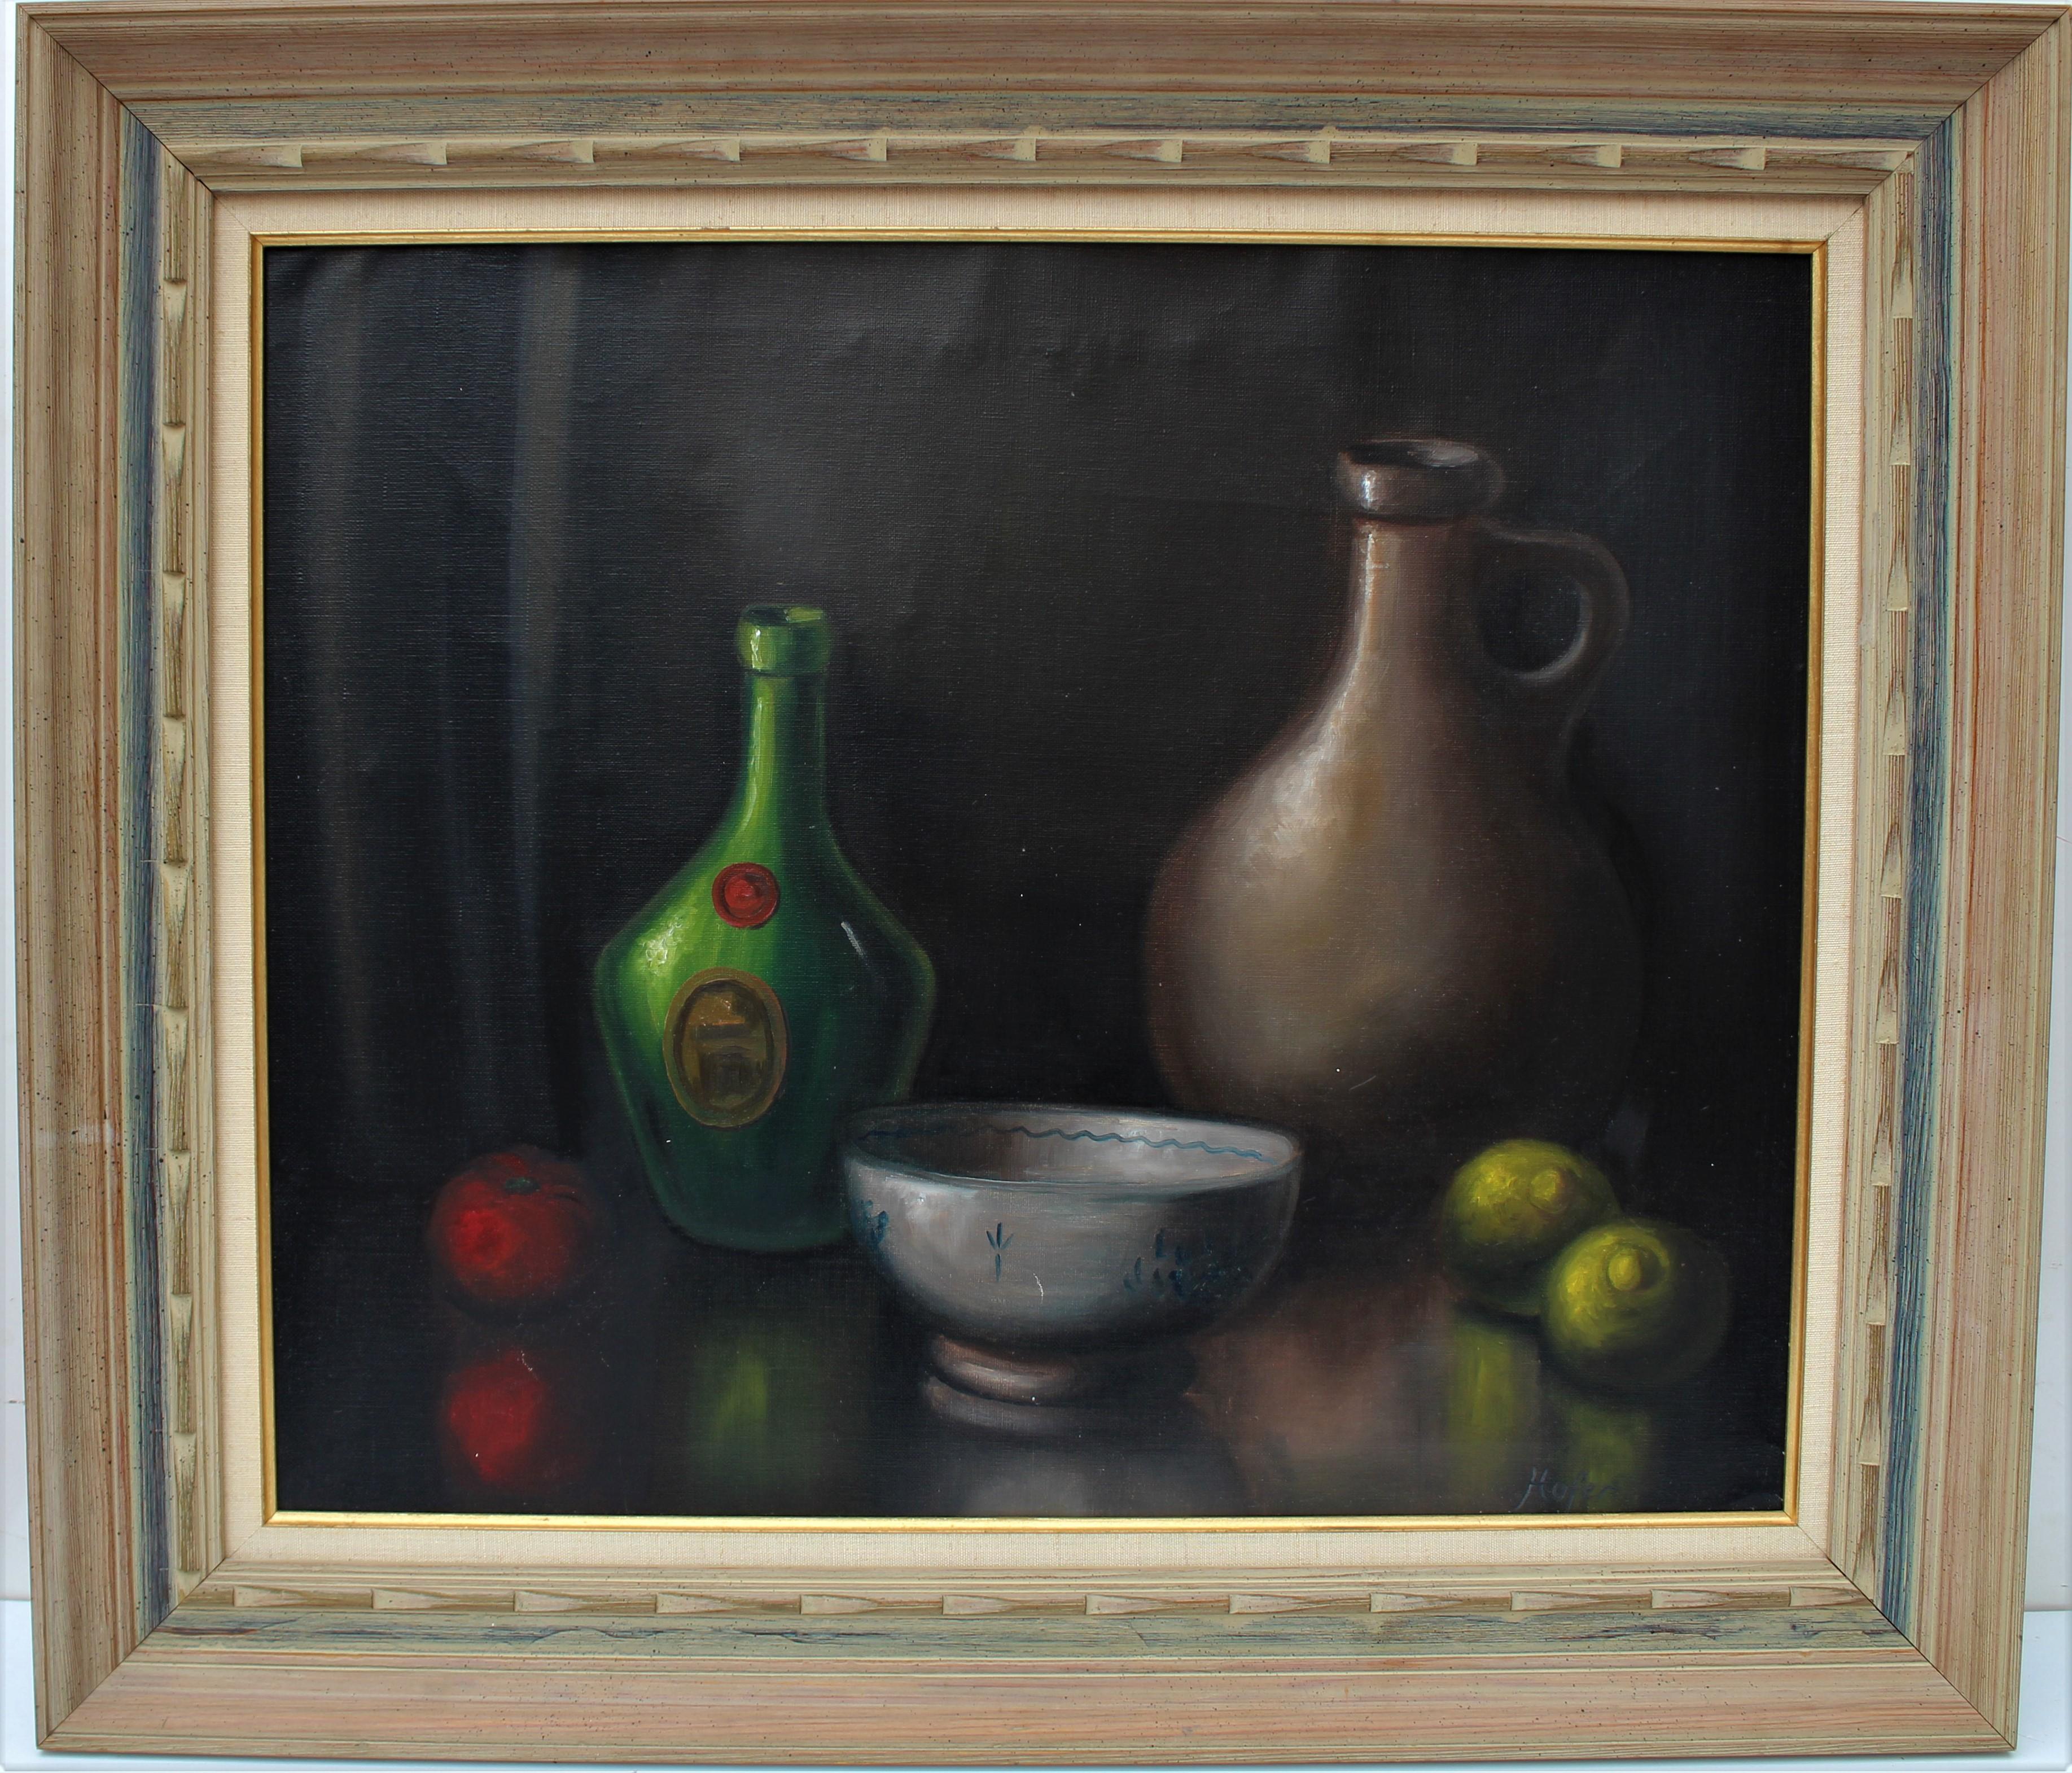 his is an original vintage  Still Life oil painting on canvas depicting an empty bowl, a wine bottle, a clay jug, a red apple, and two lemons on a table. 

Presented in a nice wood frame with a liner.

Frame and painting in good condition. Please